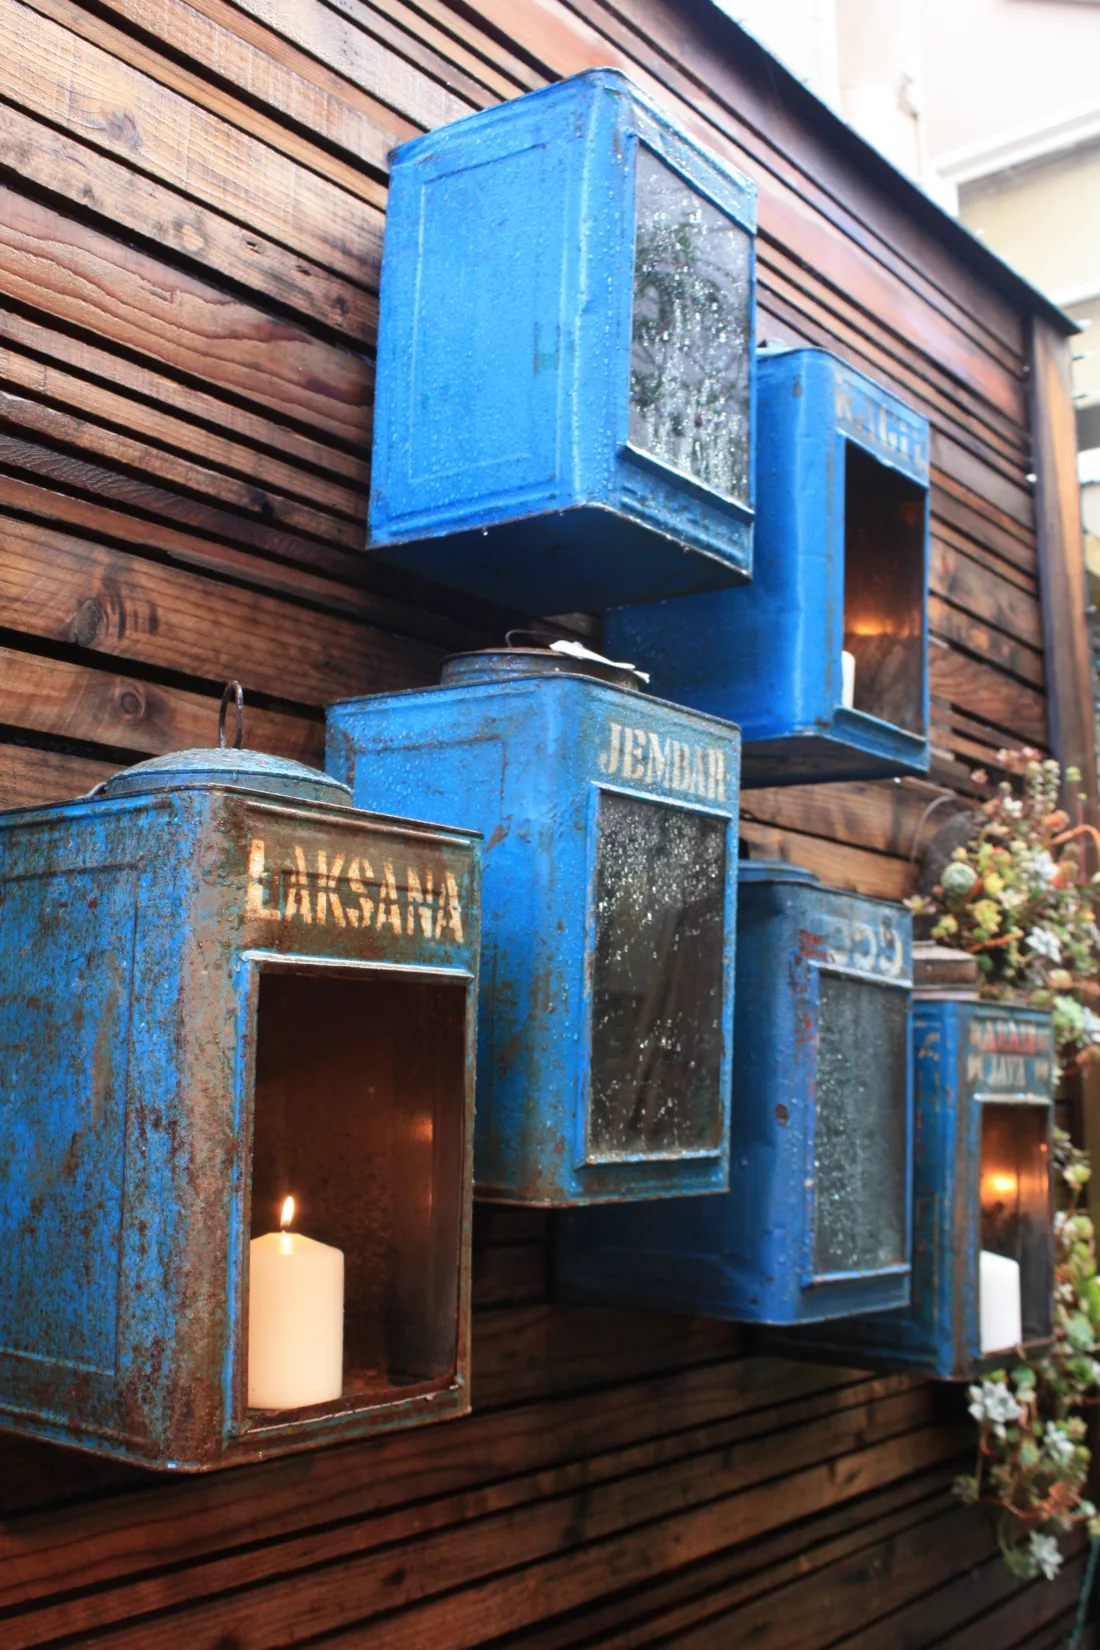 Aged metal boxes mounted on a fence as candle holders in a garden